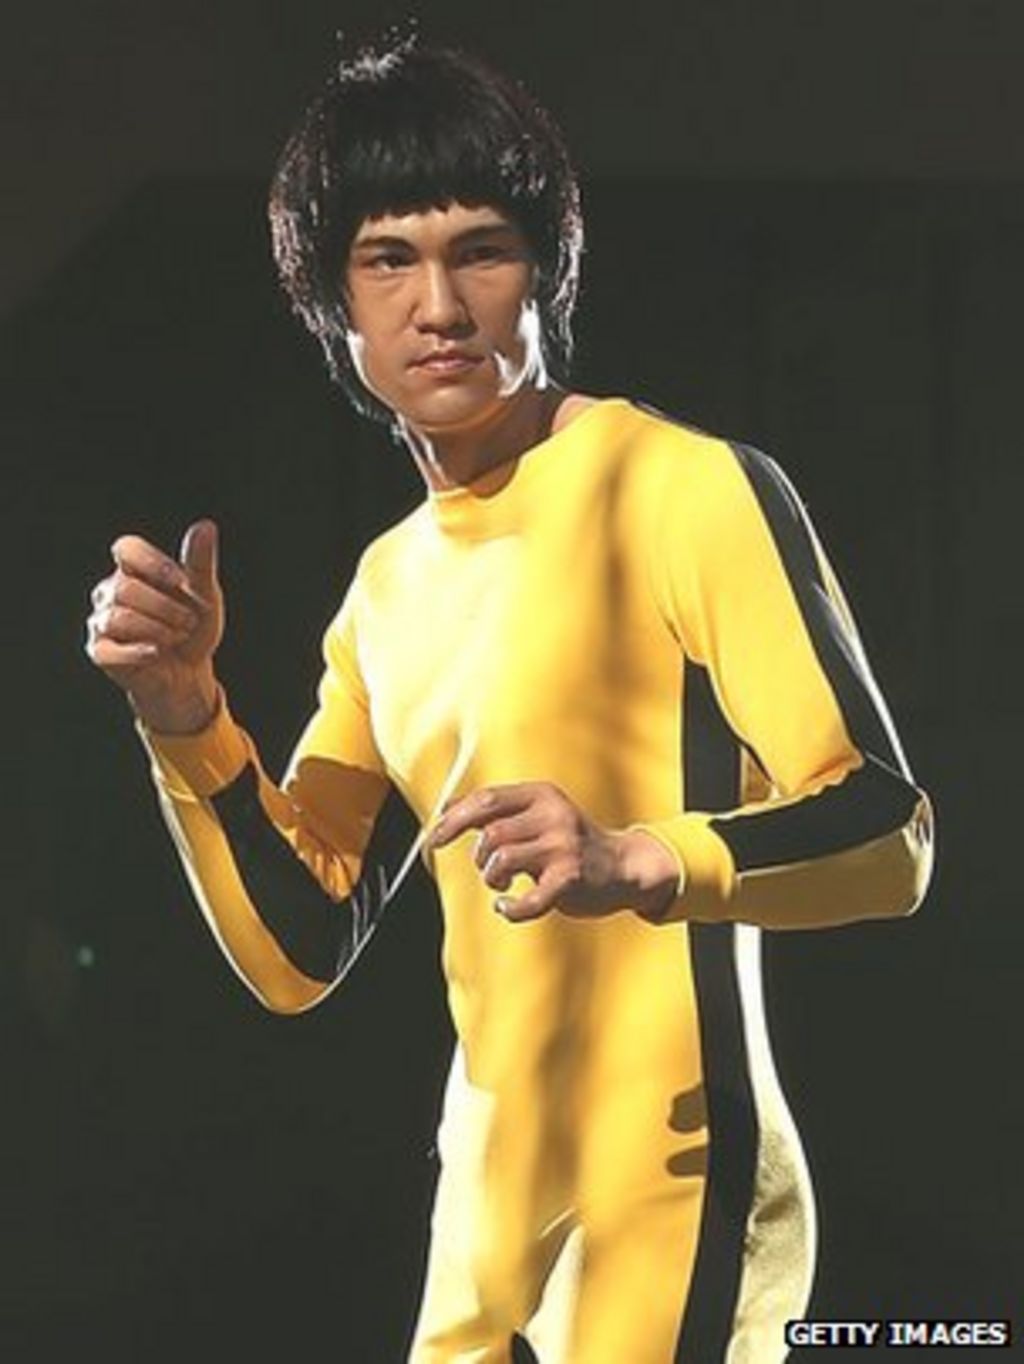 Bruce Lee: Yellow jumpsuit sells for $100,000 - BBC News